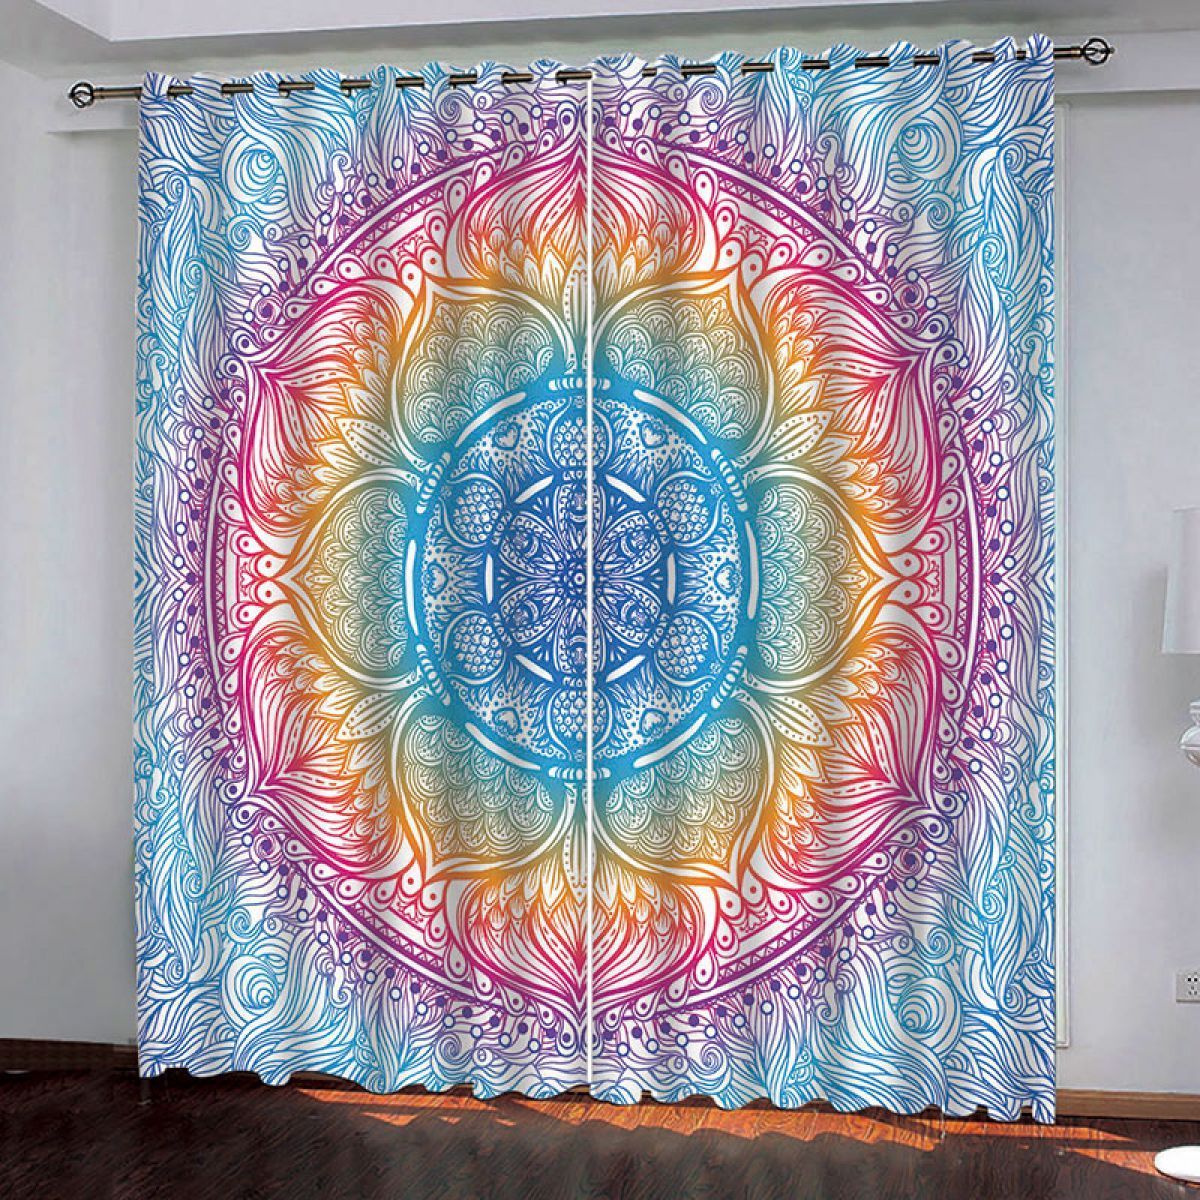 The Beauty Of Art Printed Window Curtain Home Decor